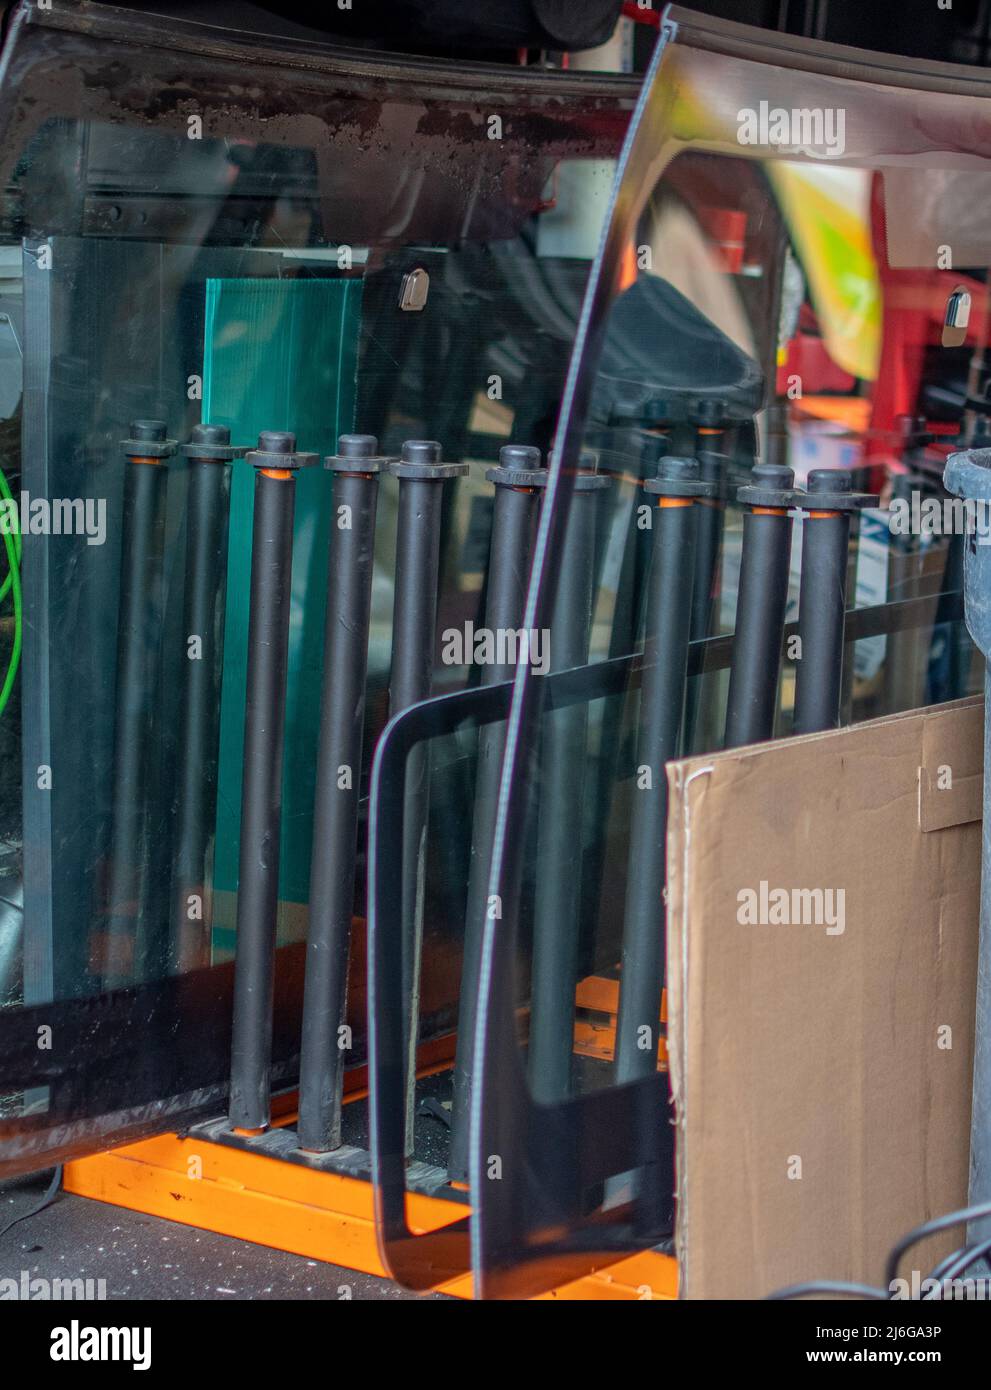 Replacement windshields sit in a rack in a delivery truck, ready to be installed in vehicles Stock Photo